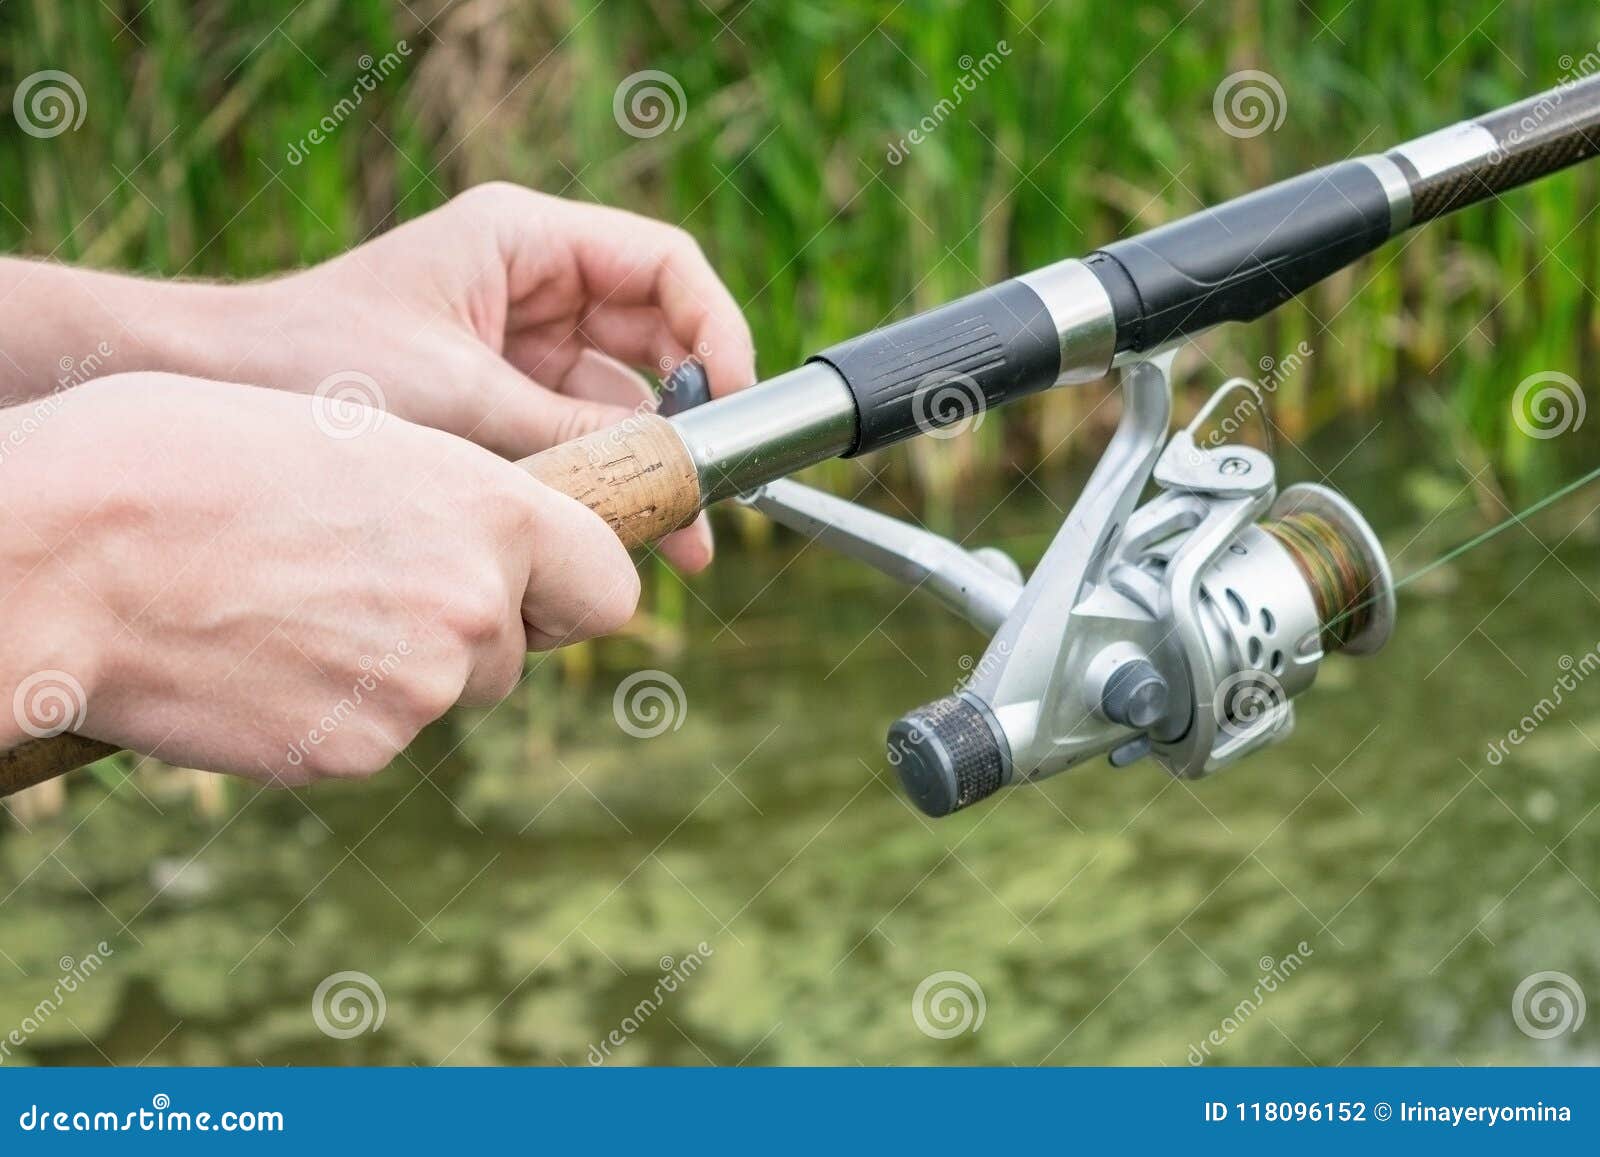 https://thumbs.dreamstime.com/z/man%C3%A2%E2%82%AC%E2%84%A2s-hand-fishing-rod-feeder-reel-river-bank-green-reeds-fisherman-s-mounted-english-style-118096152.jpg